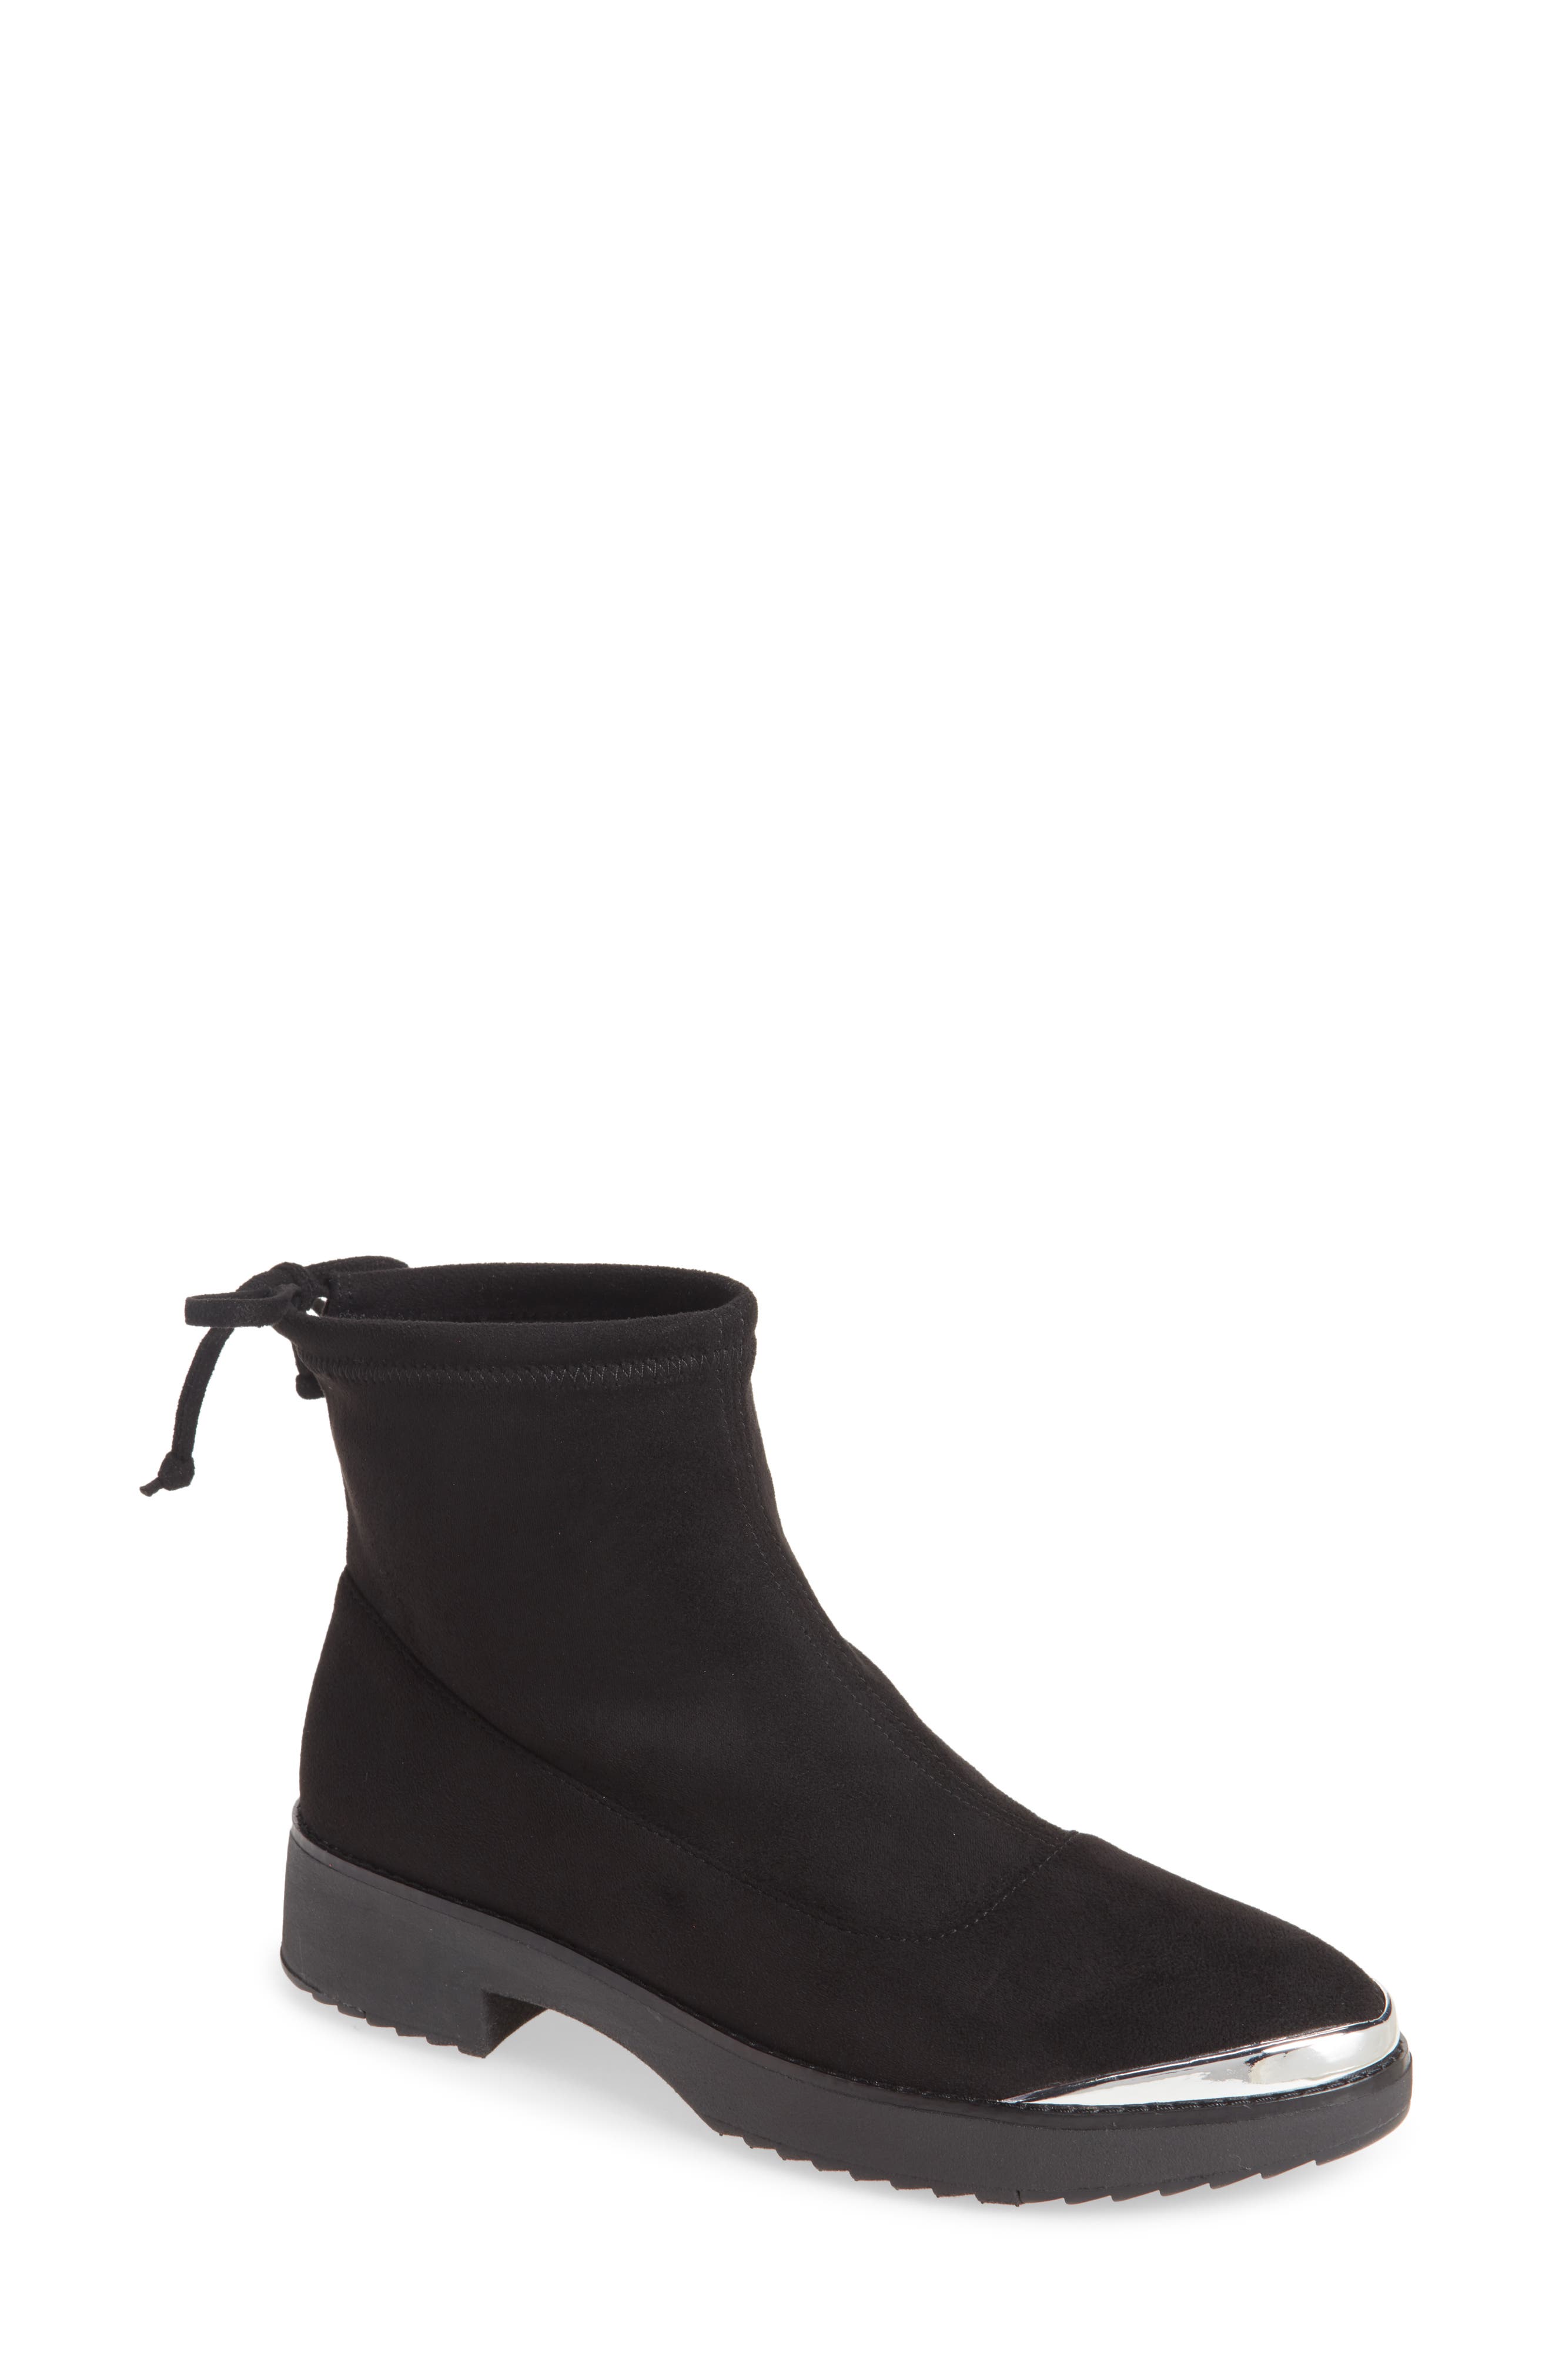 fitflop black boots